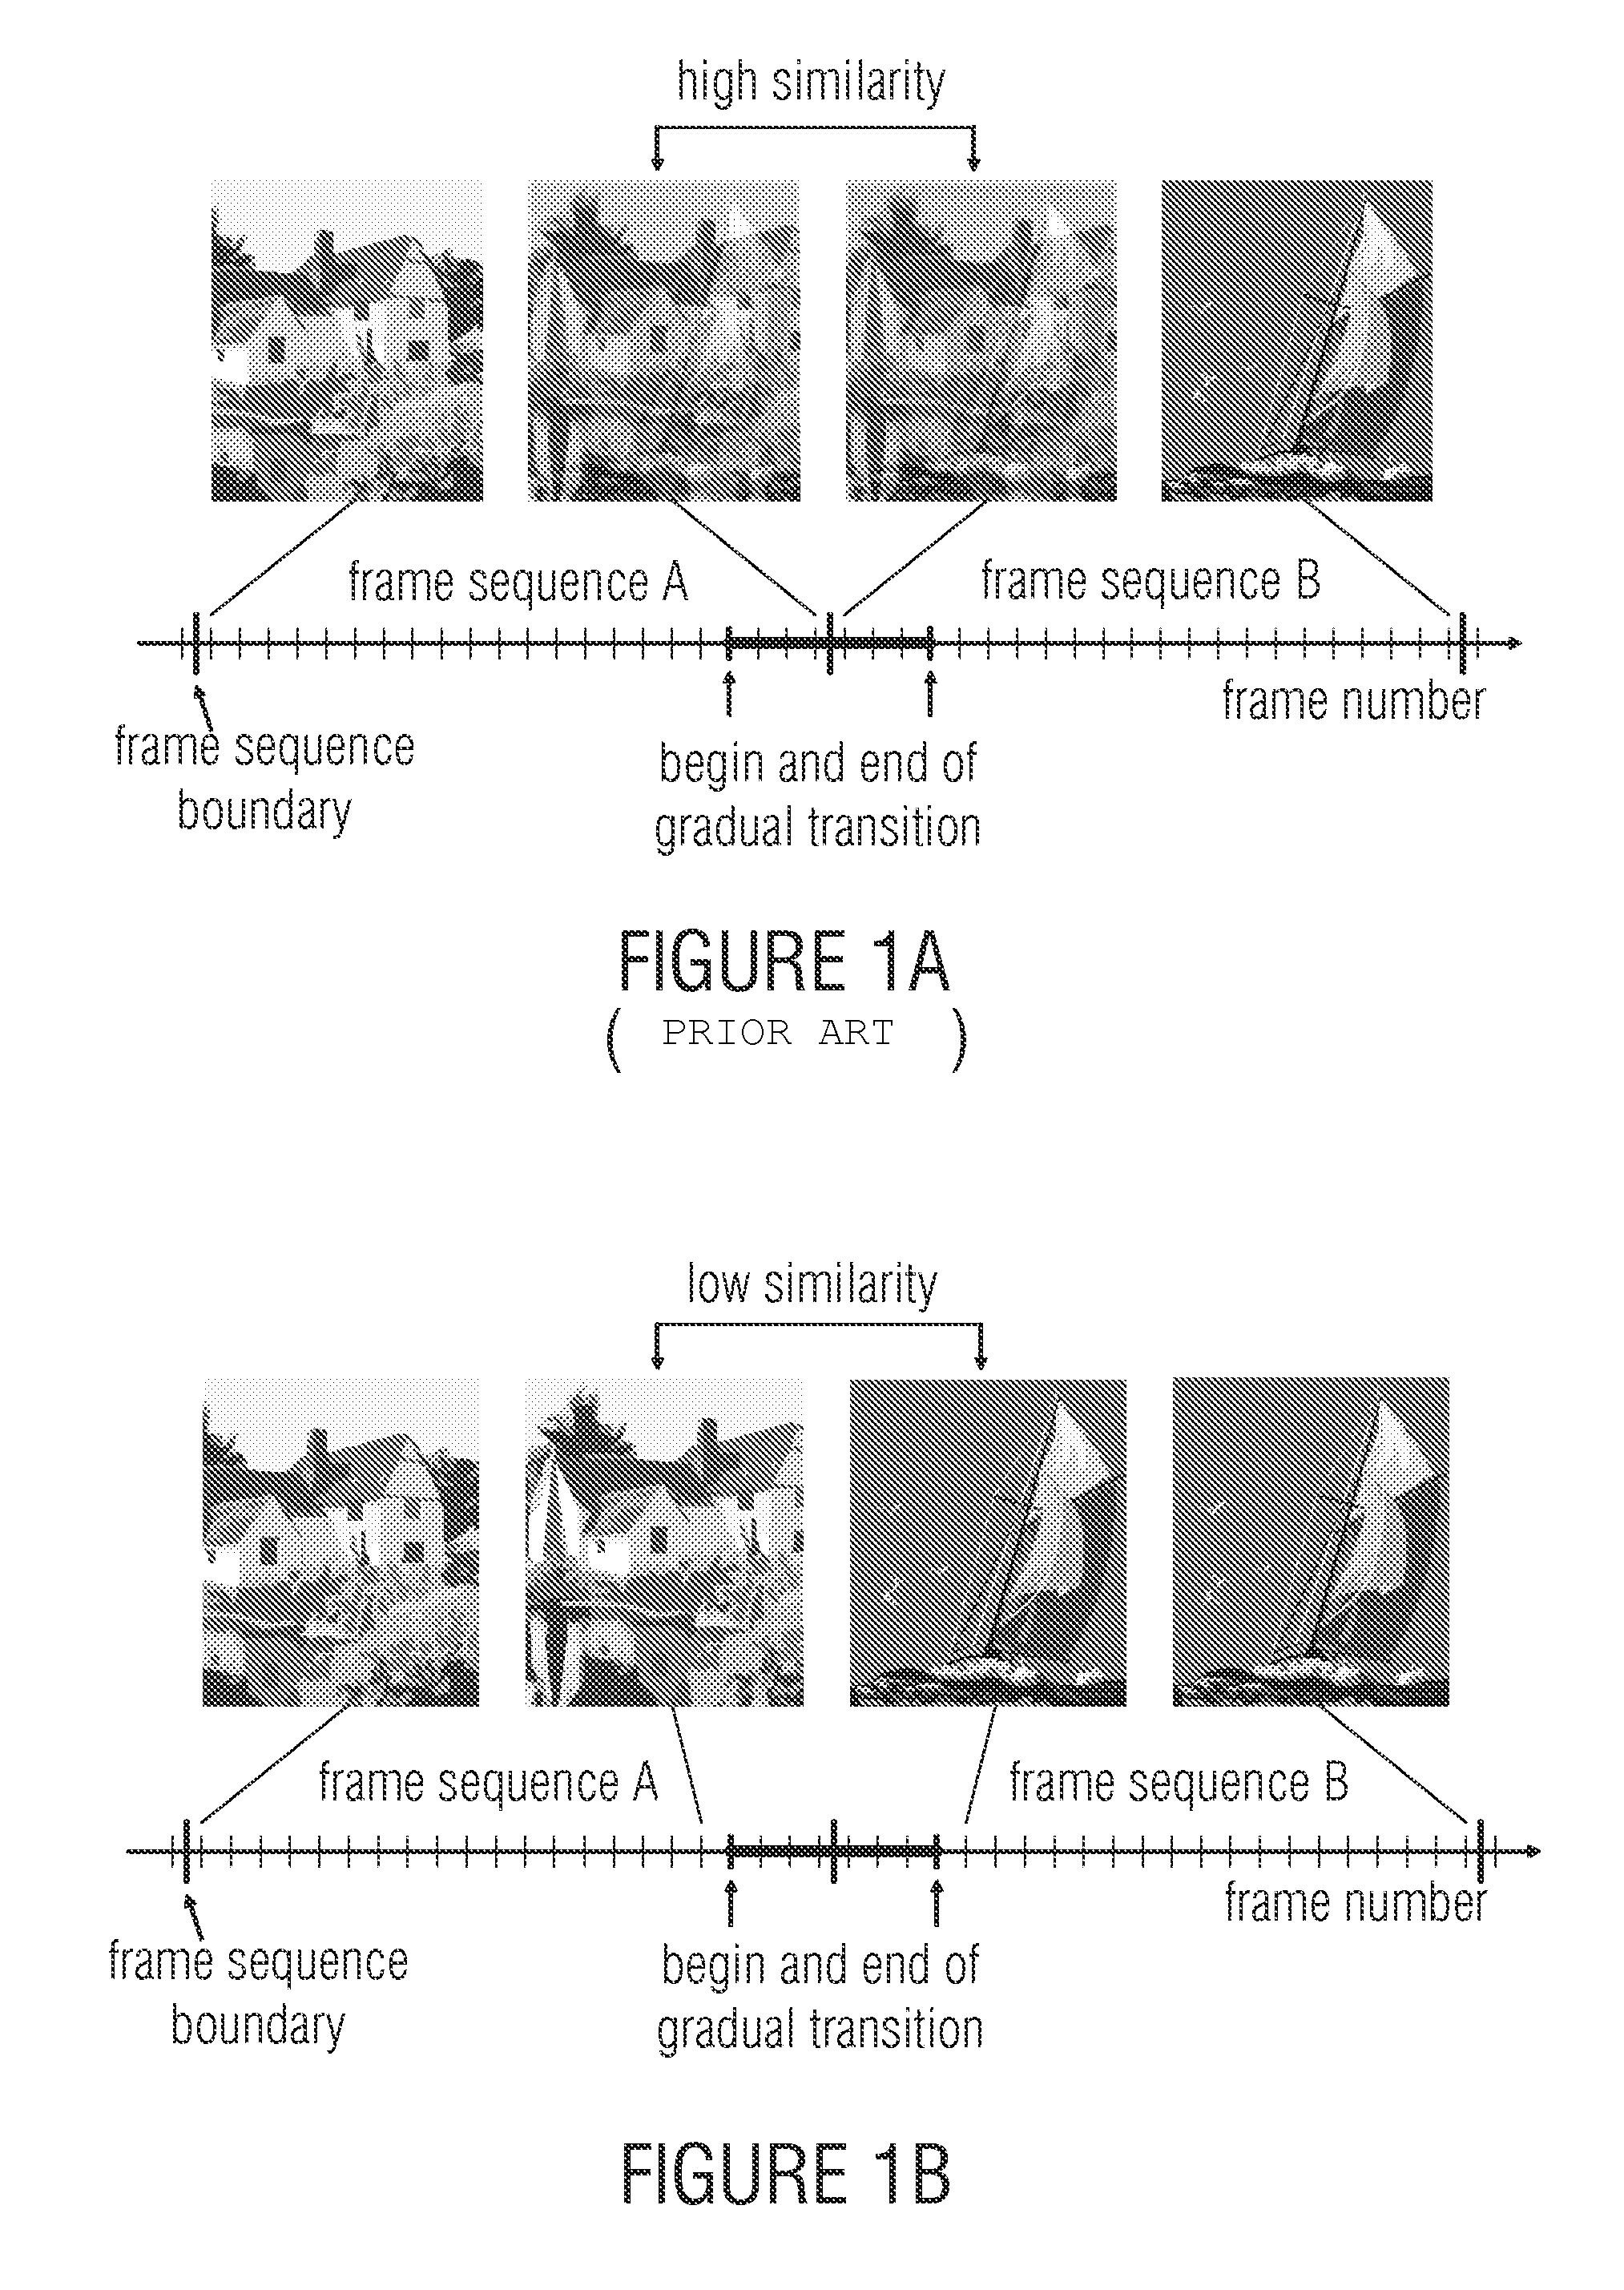 Automated method for temporal segmentation of a video into scenes with taking different types of transitions between frame sequences into account